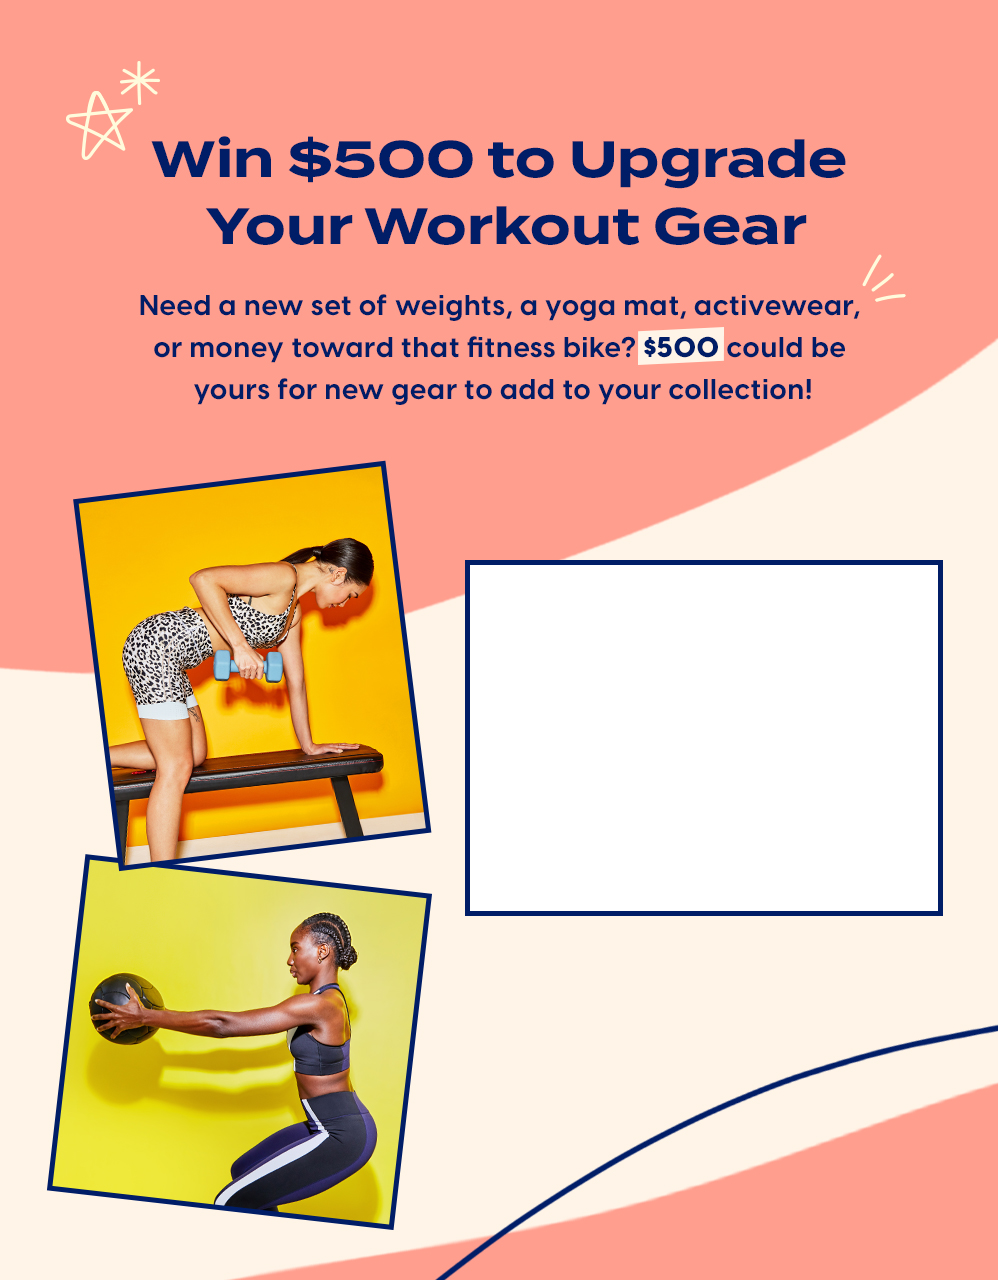 Win $500 to Upgrade Your Workout Gear